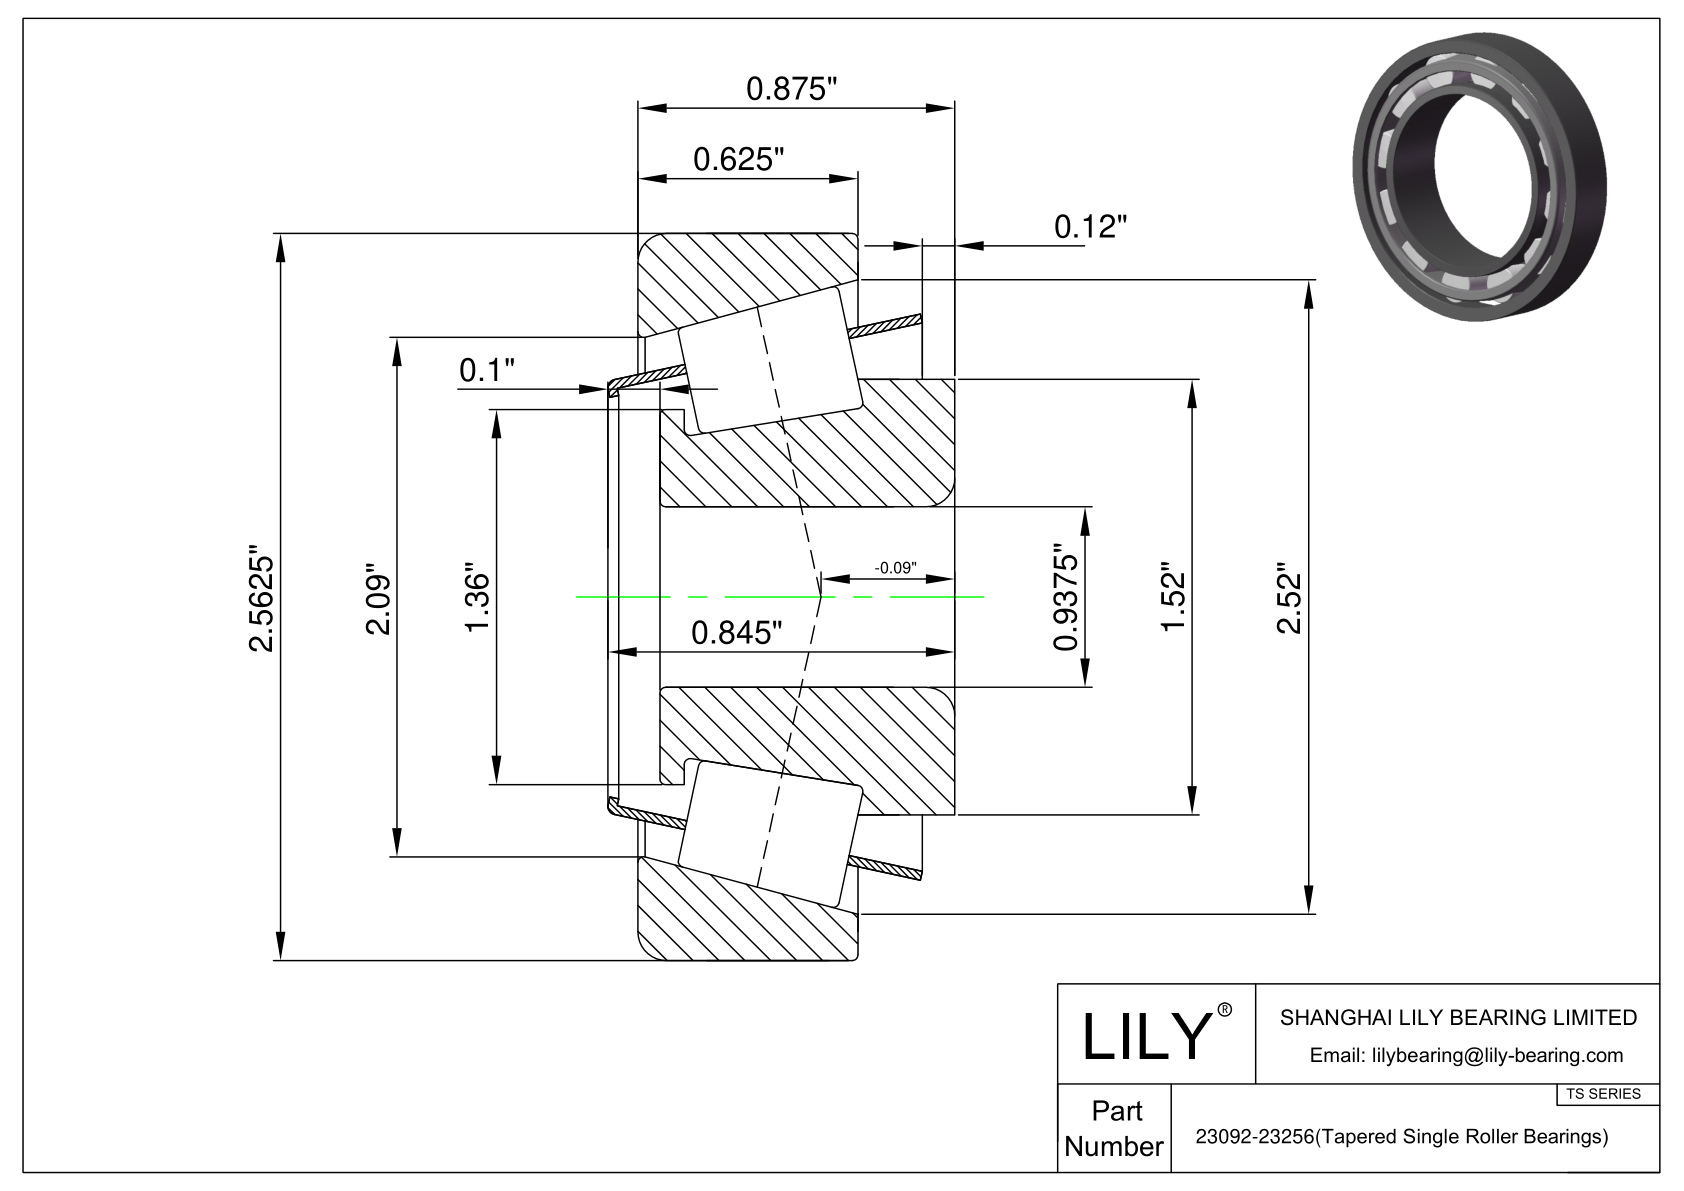 23092-23256 TS (Tapered Single Roller Bearings) (Imperial) cad drawing